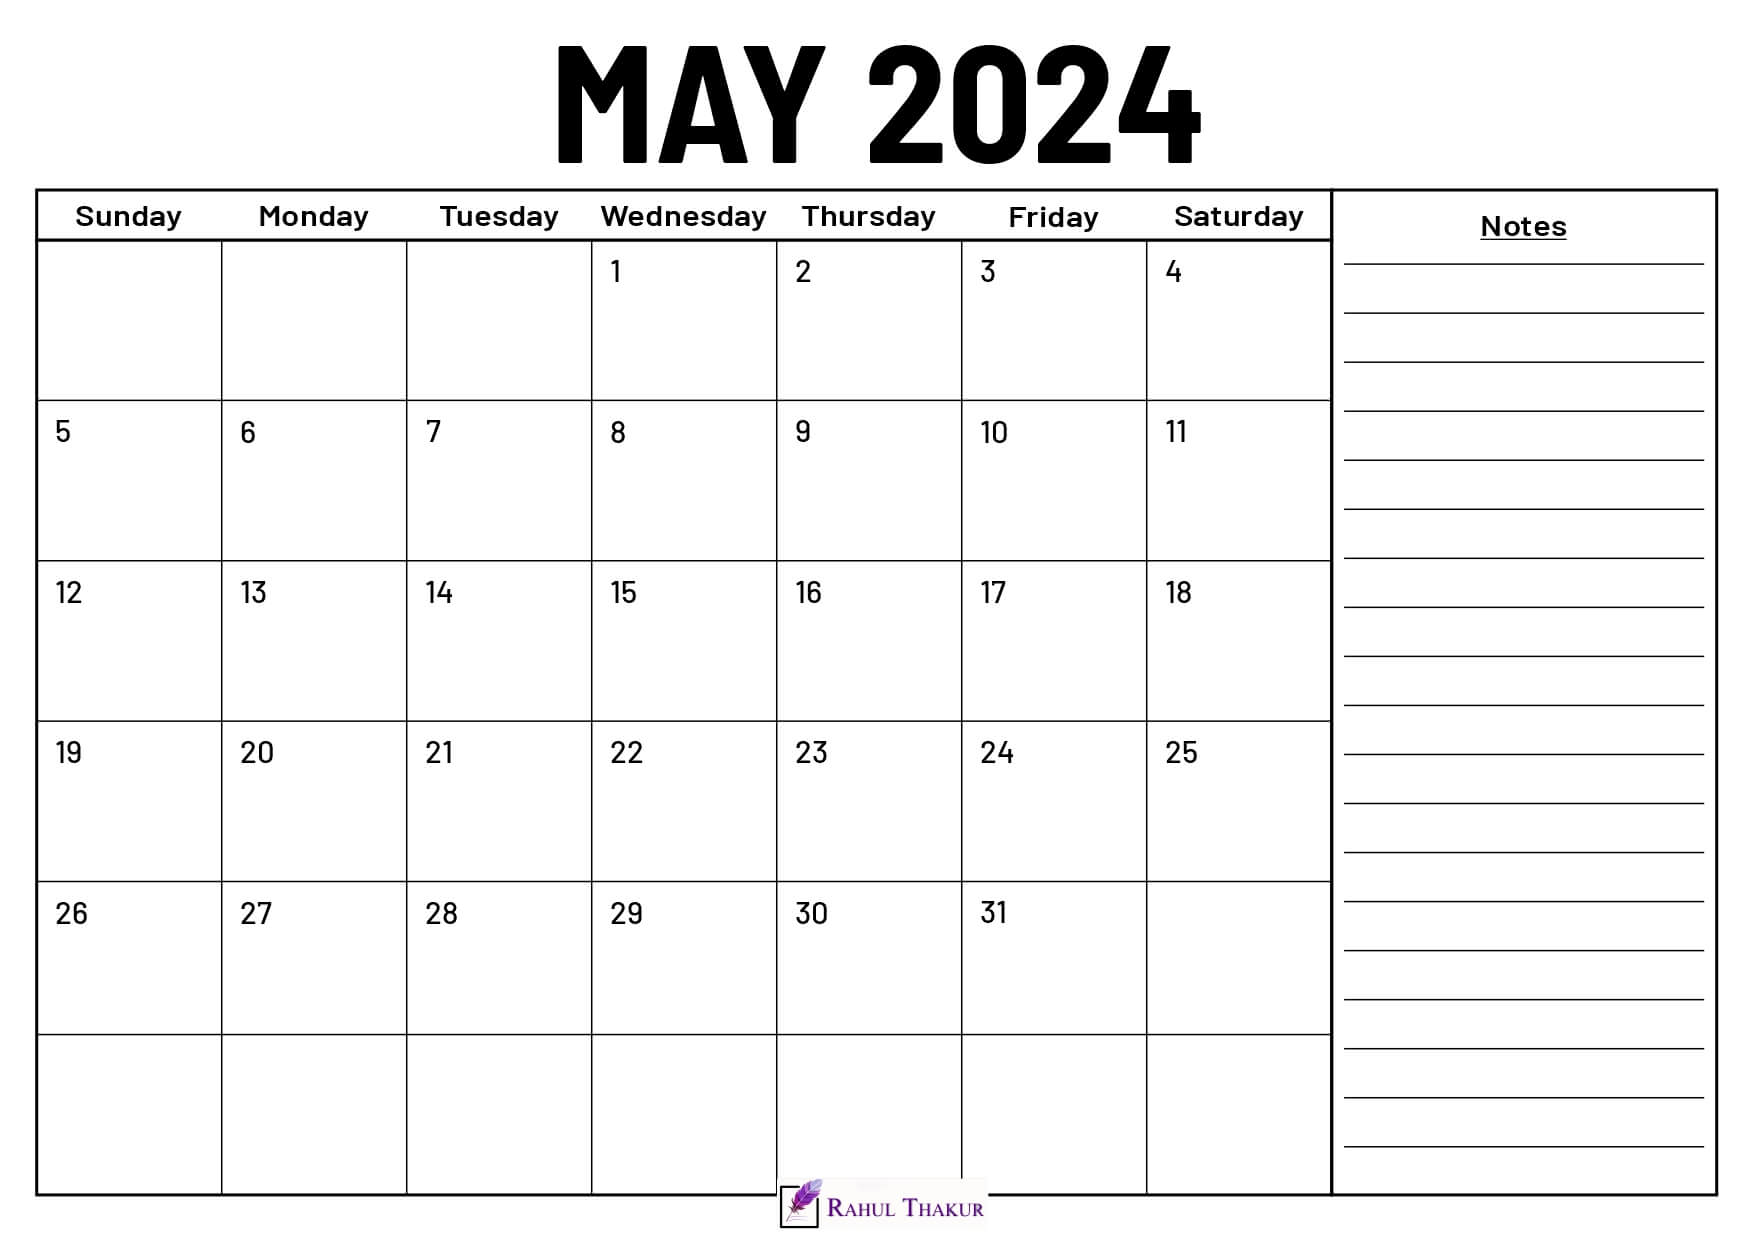 May 2024 Calendar With Notes